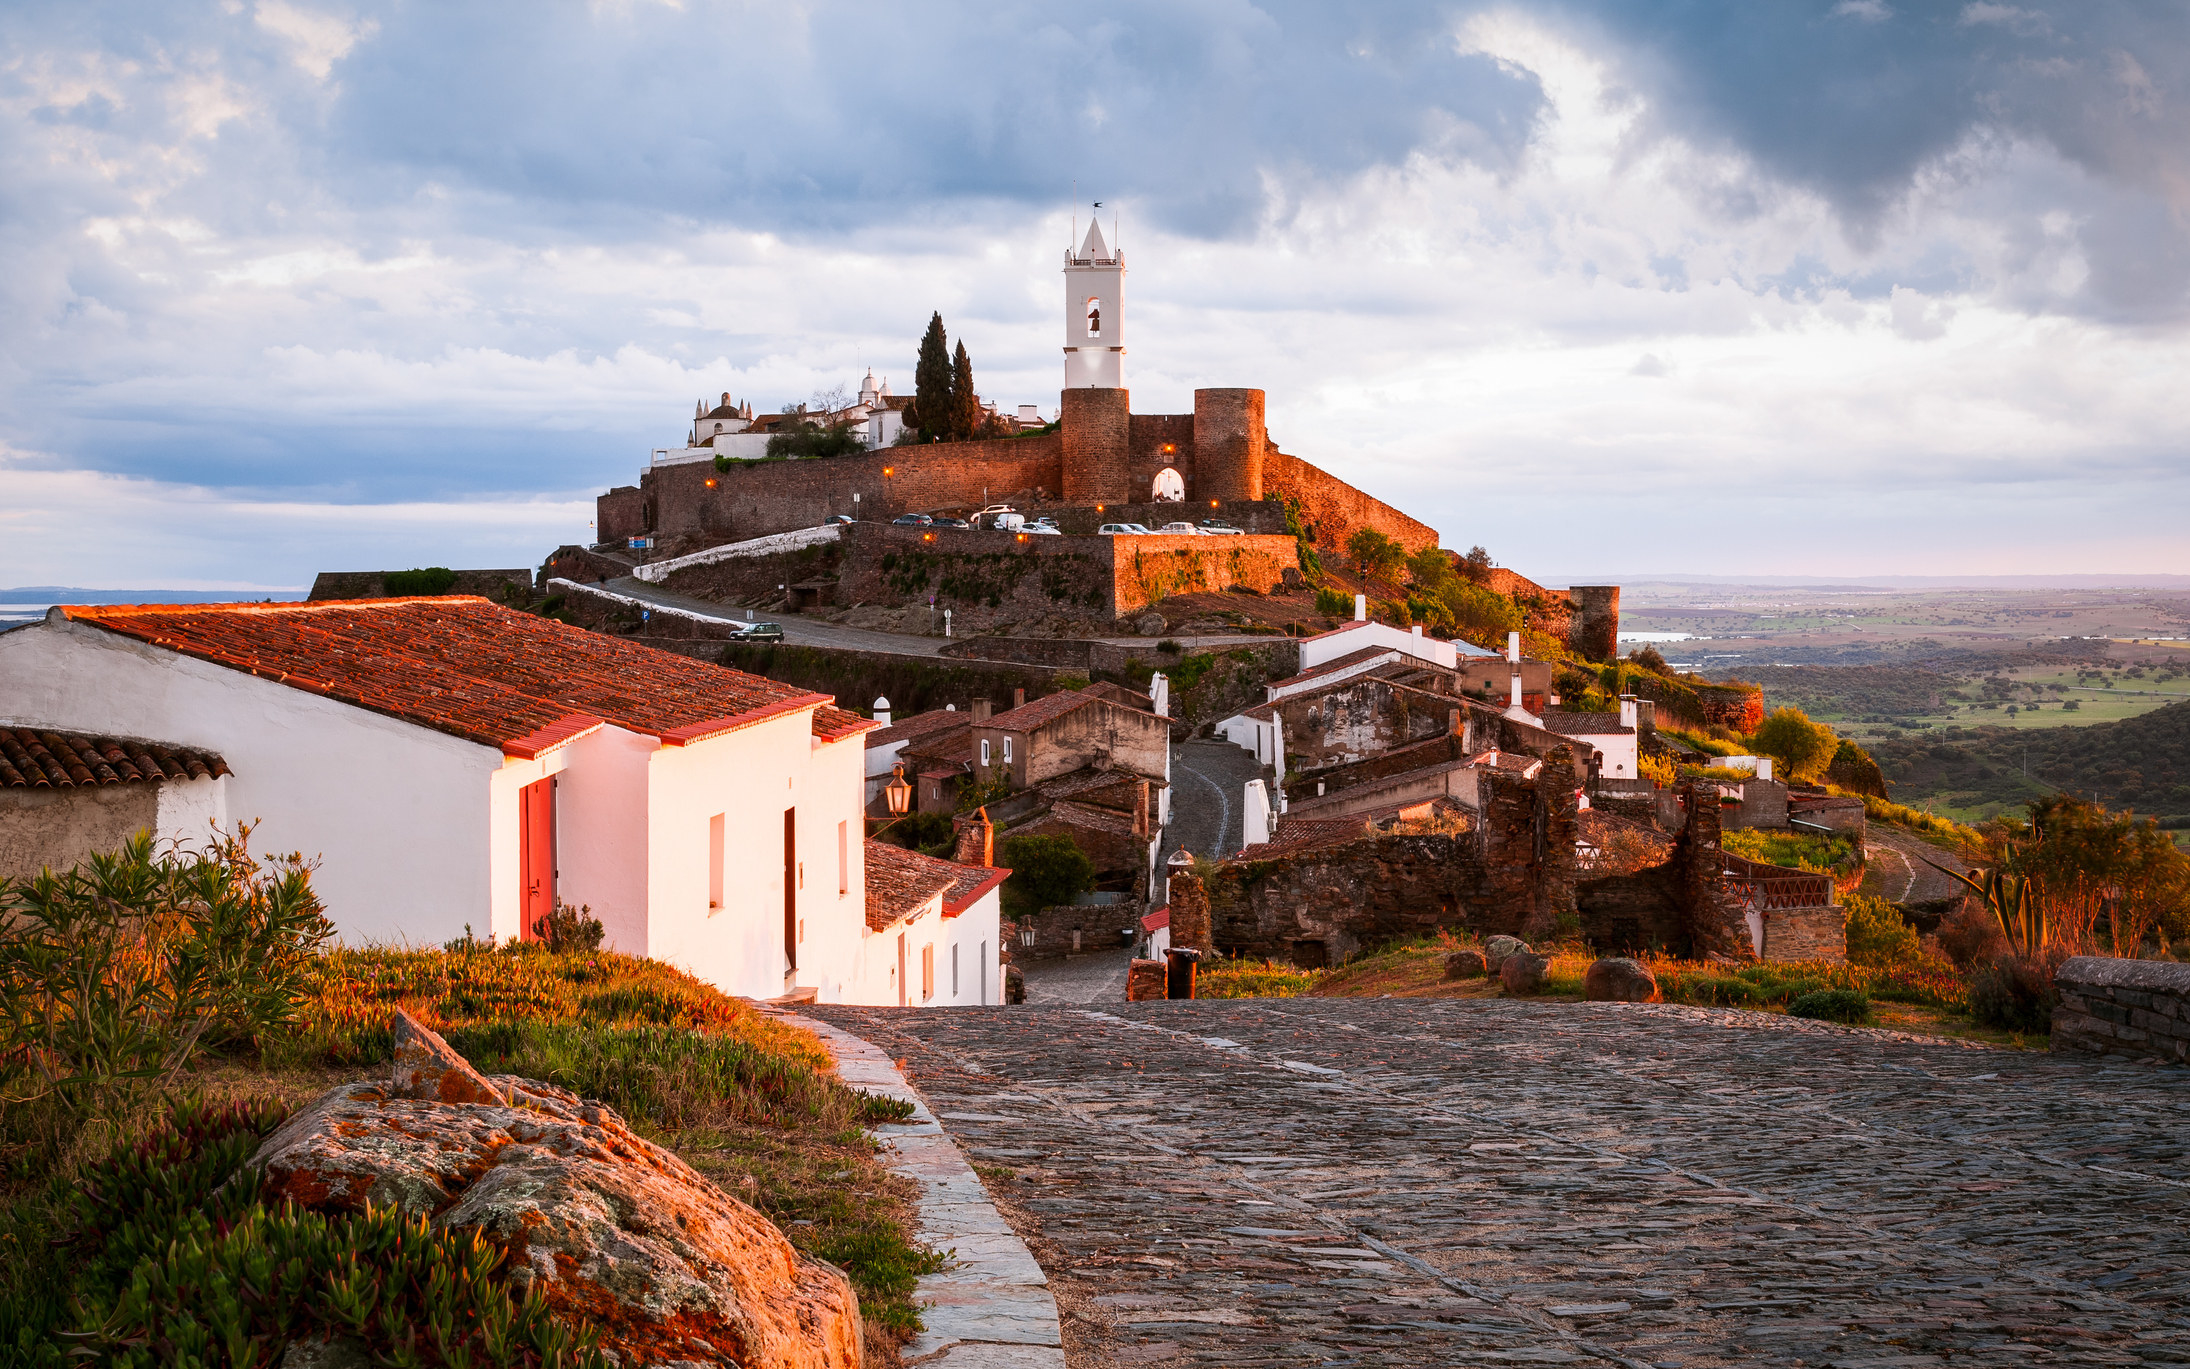 A hilltop town in Portugal